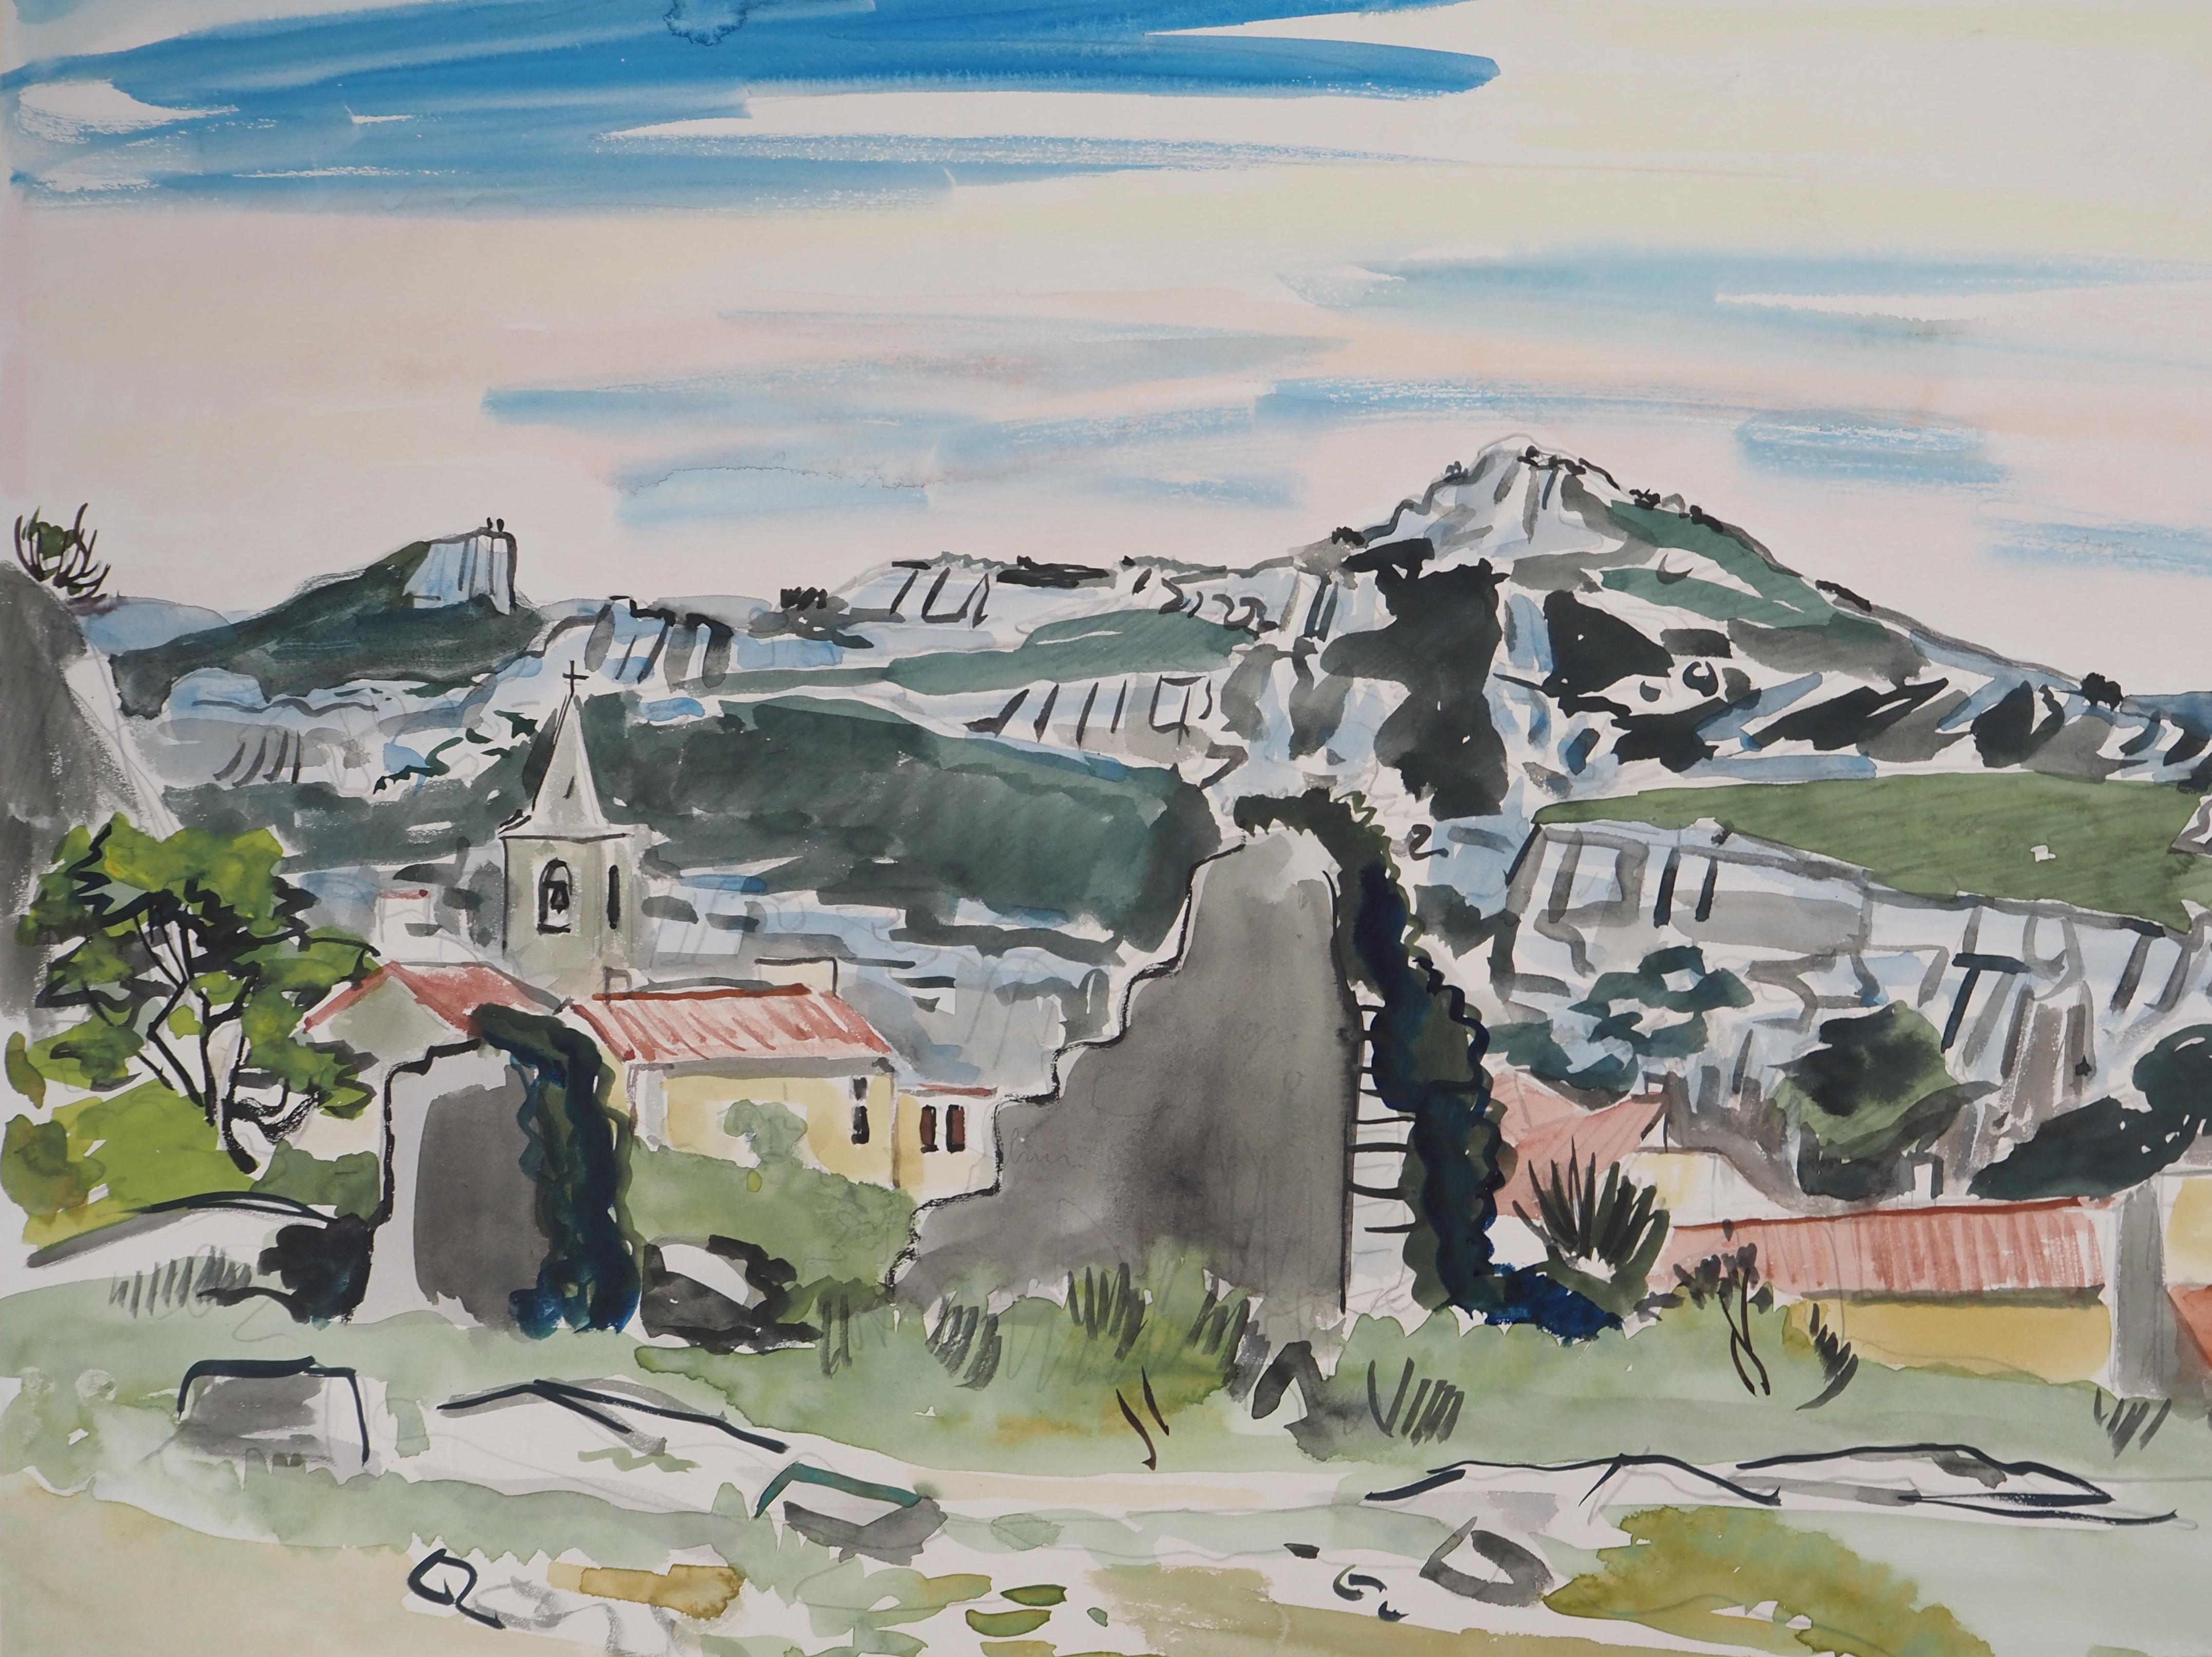 Provence : Small Village and Mountains - Original Watercolor, Handsigned - Modern Art by Yves Brayer